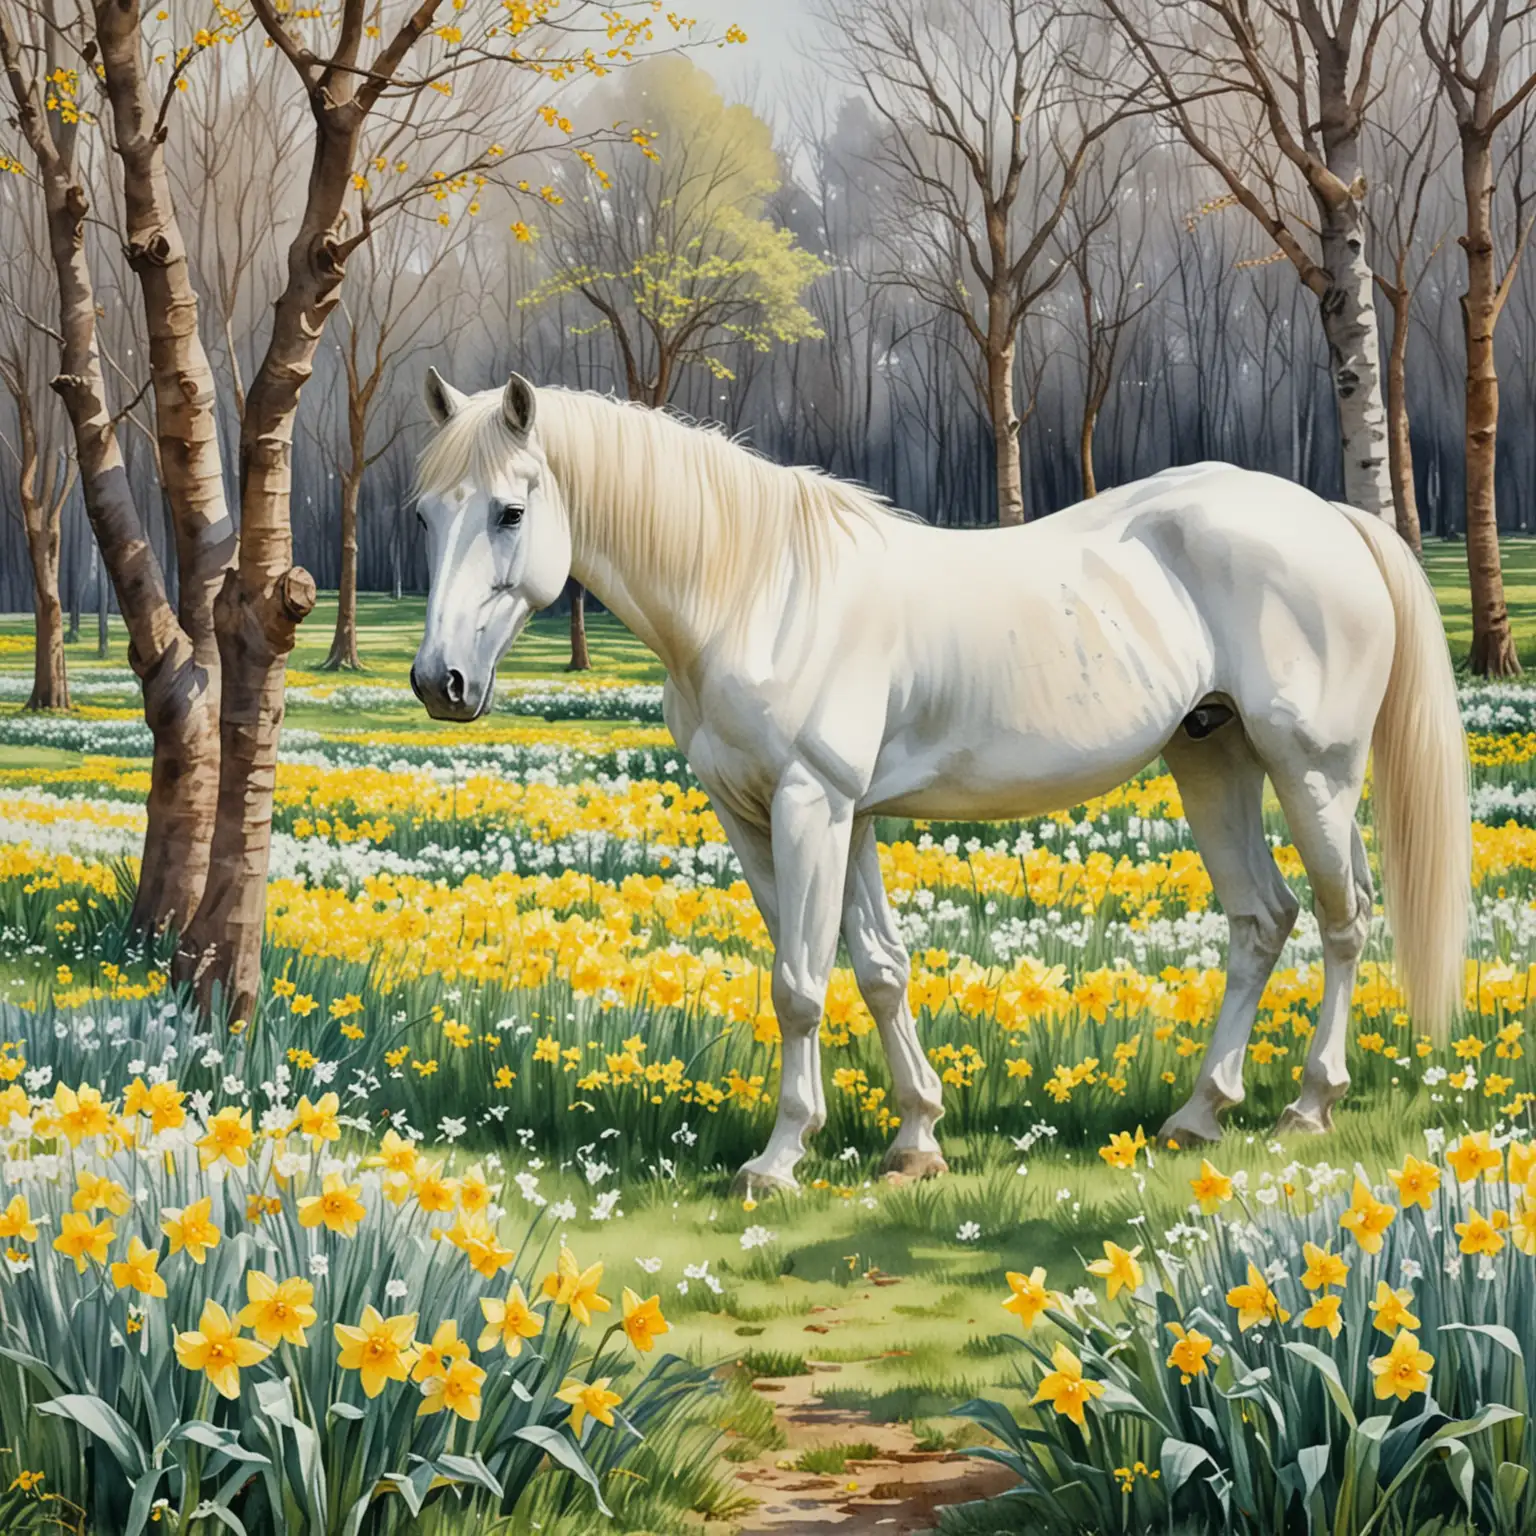 Elegant White Horse in a DaffodilStudded Park during Spring